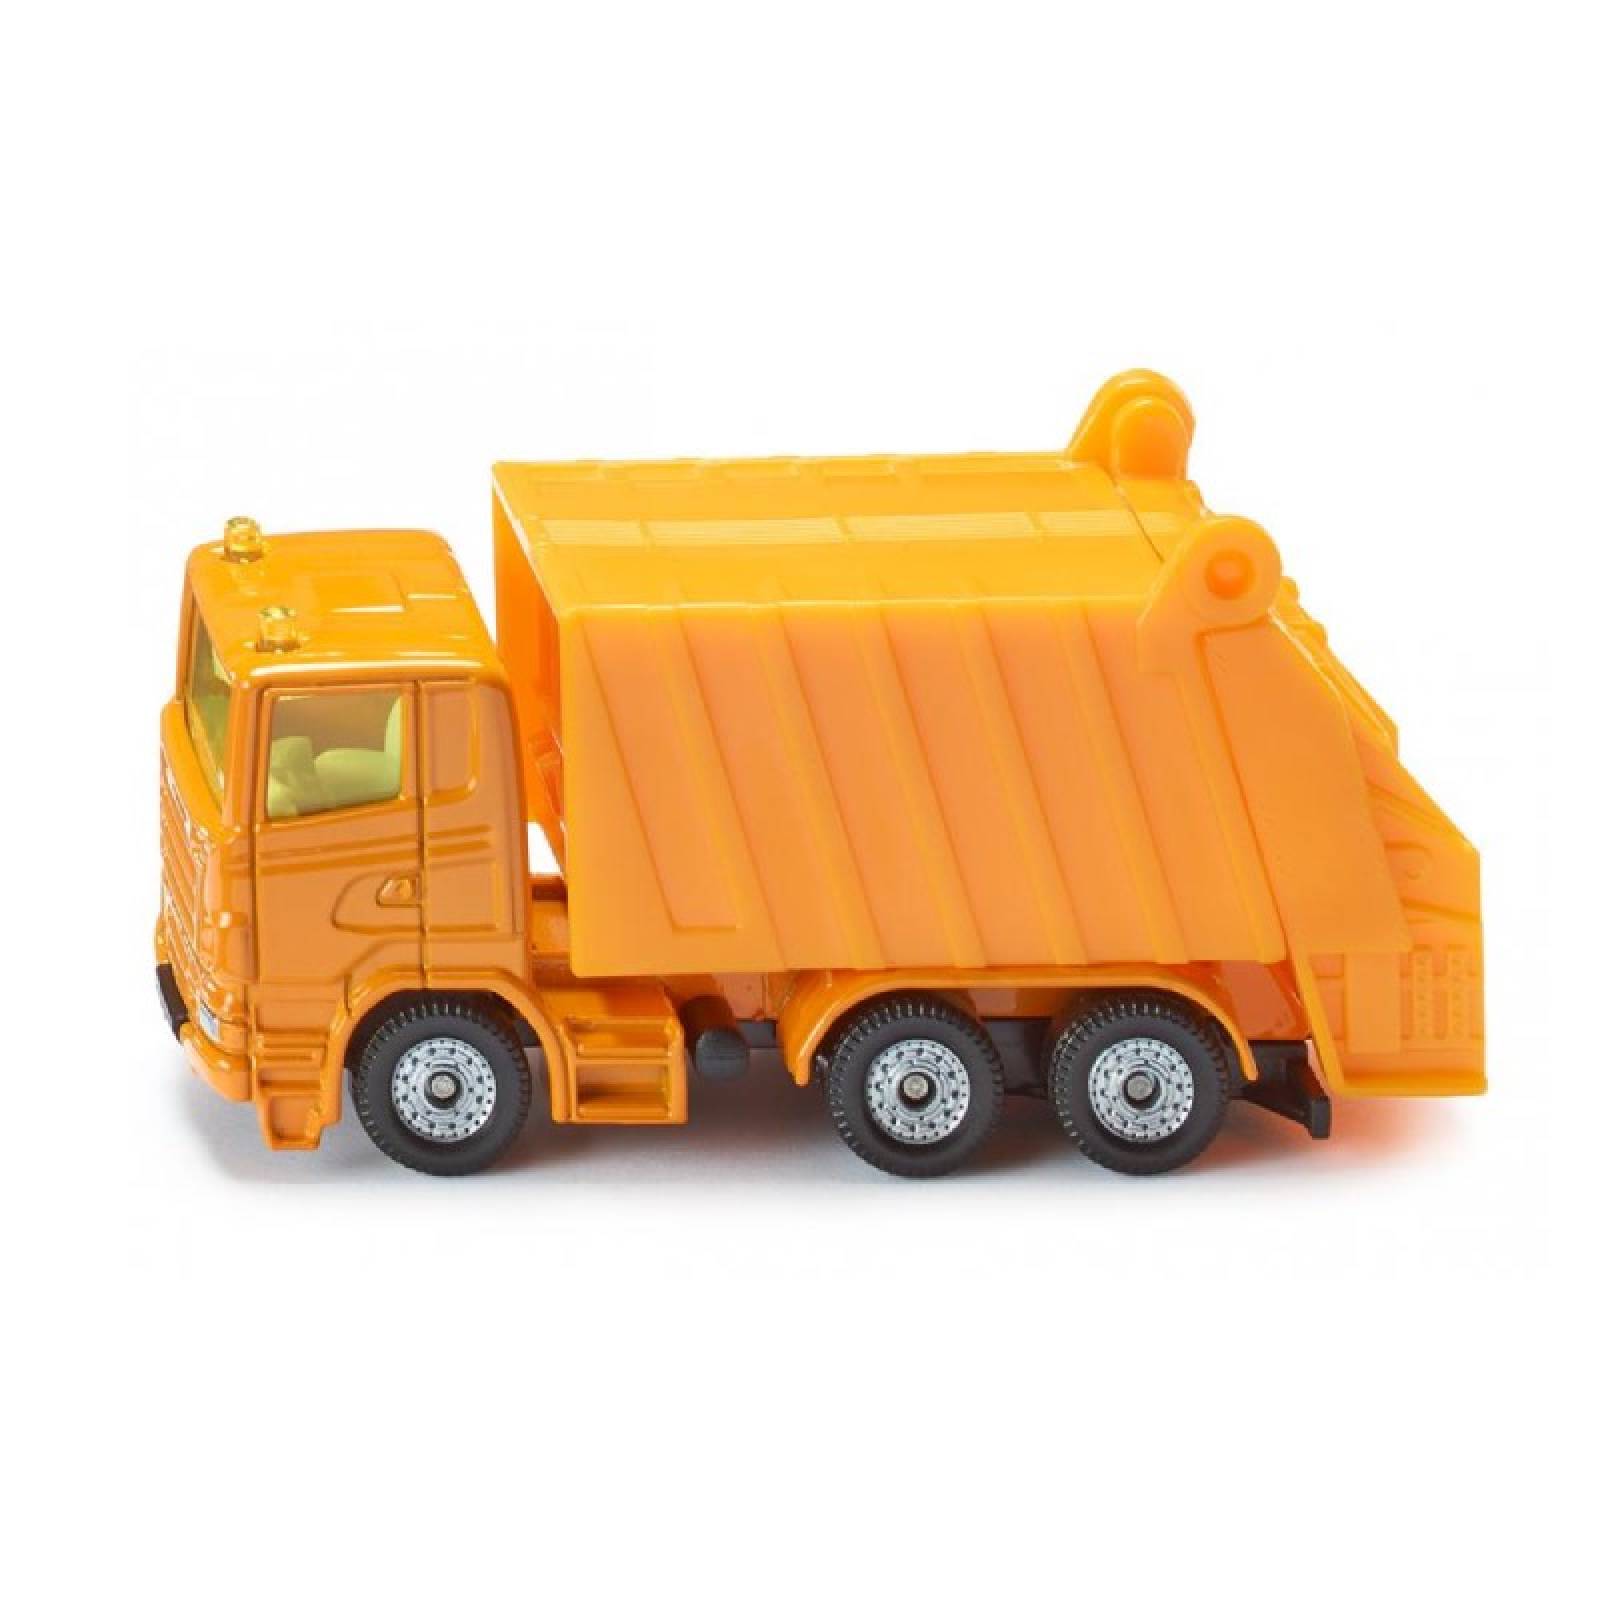 Refuse Truck - Single Die-Cast Toy Vehicle 0811 3+ thumbnails